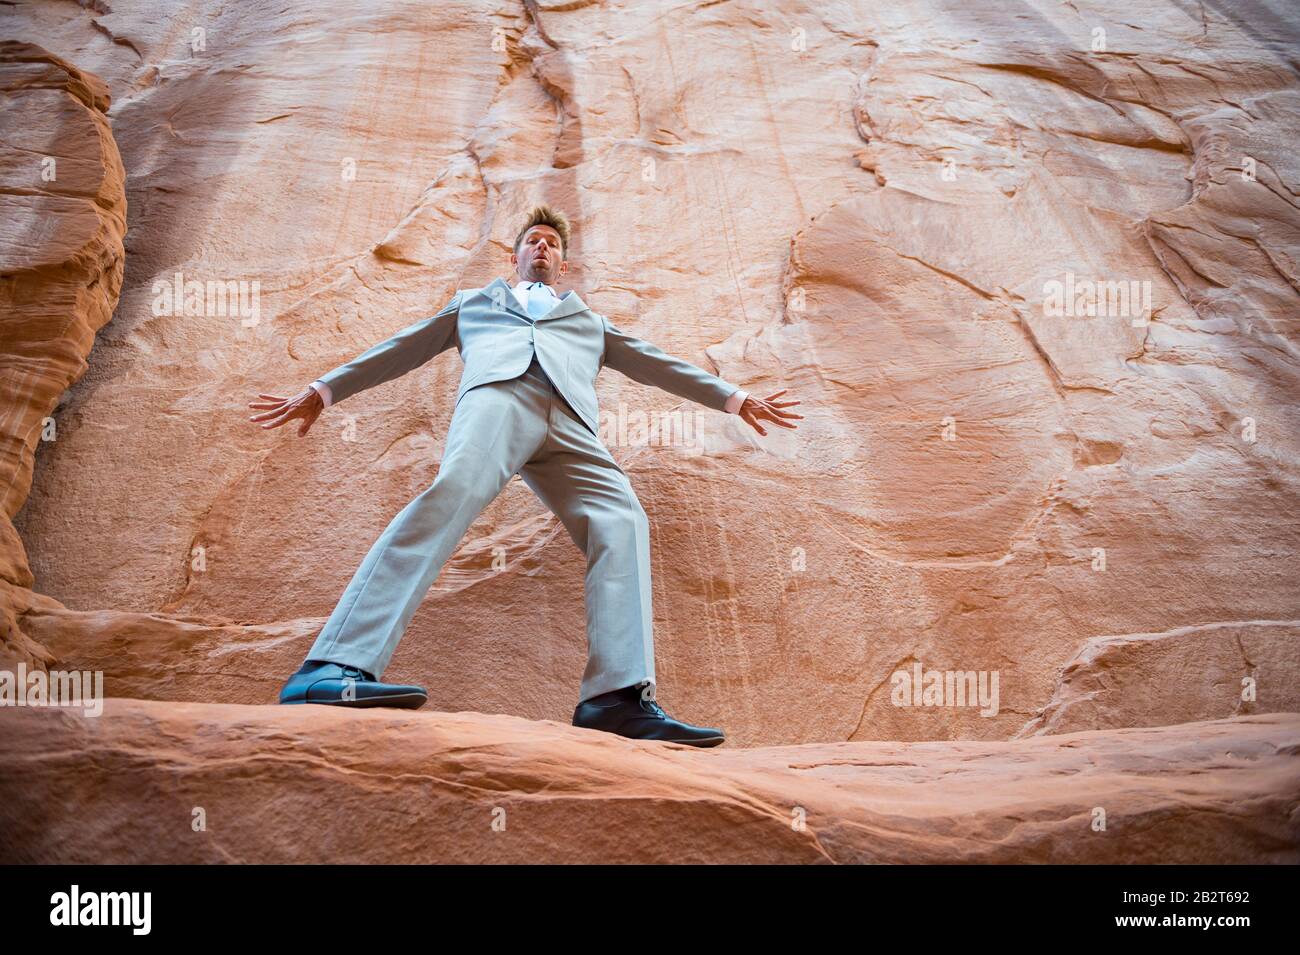 Nervous businessman balancing on a narrow ledge in a red rock canyon Stock Photo